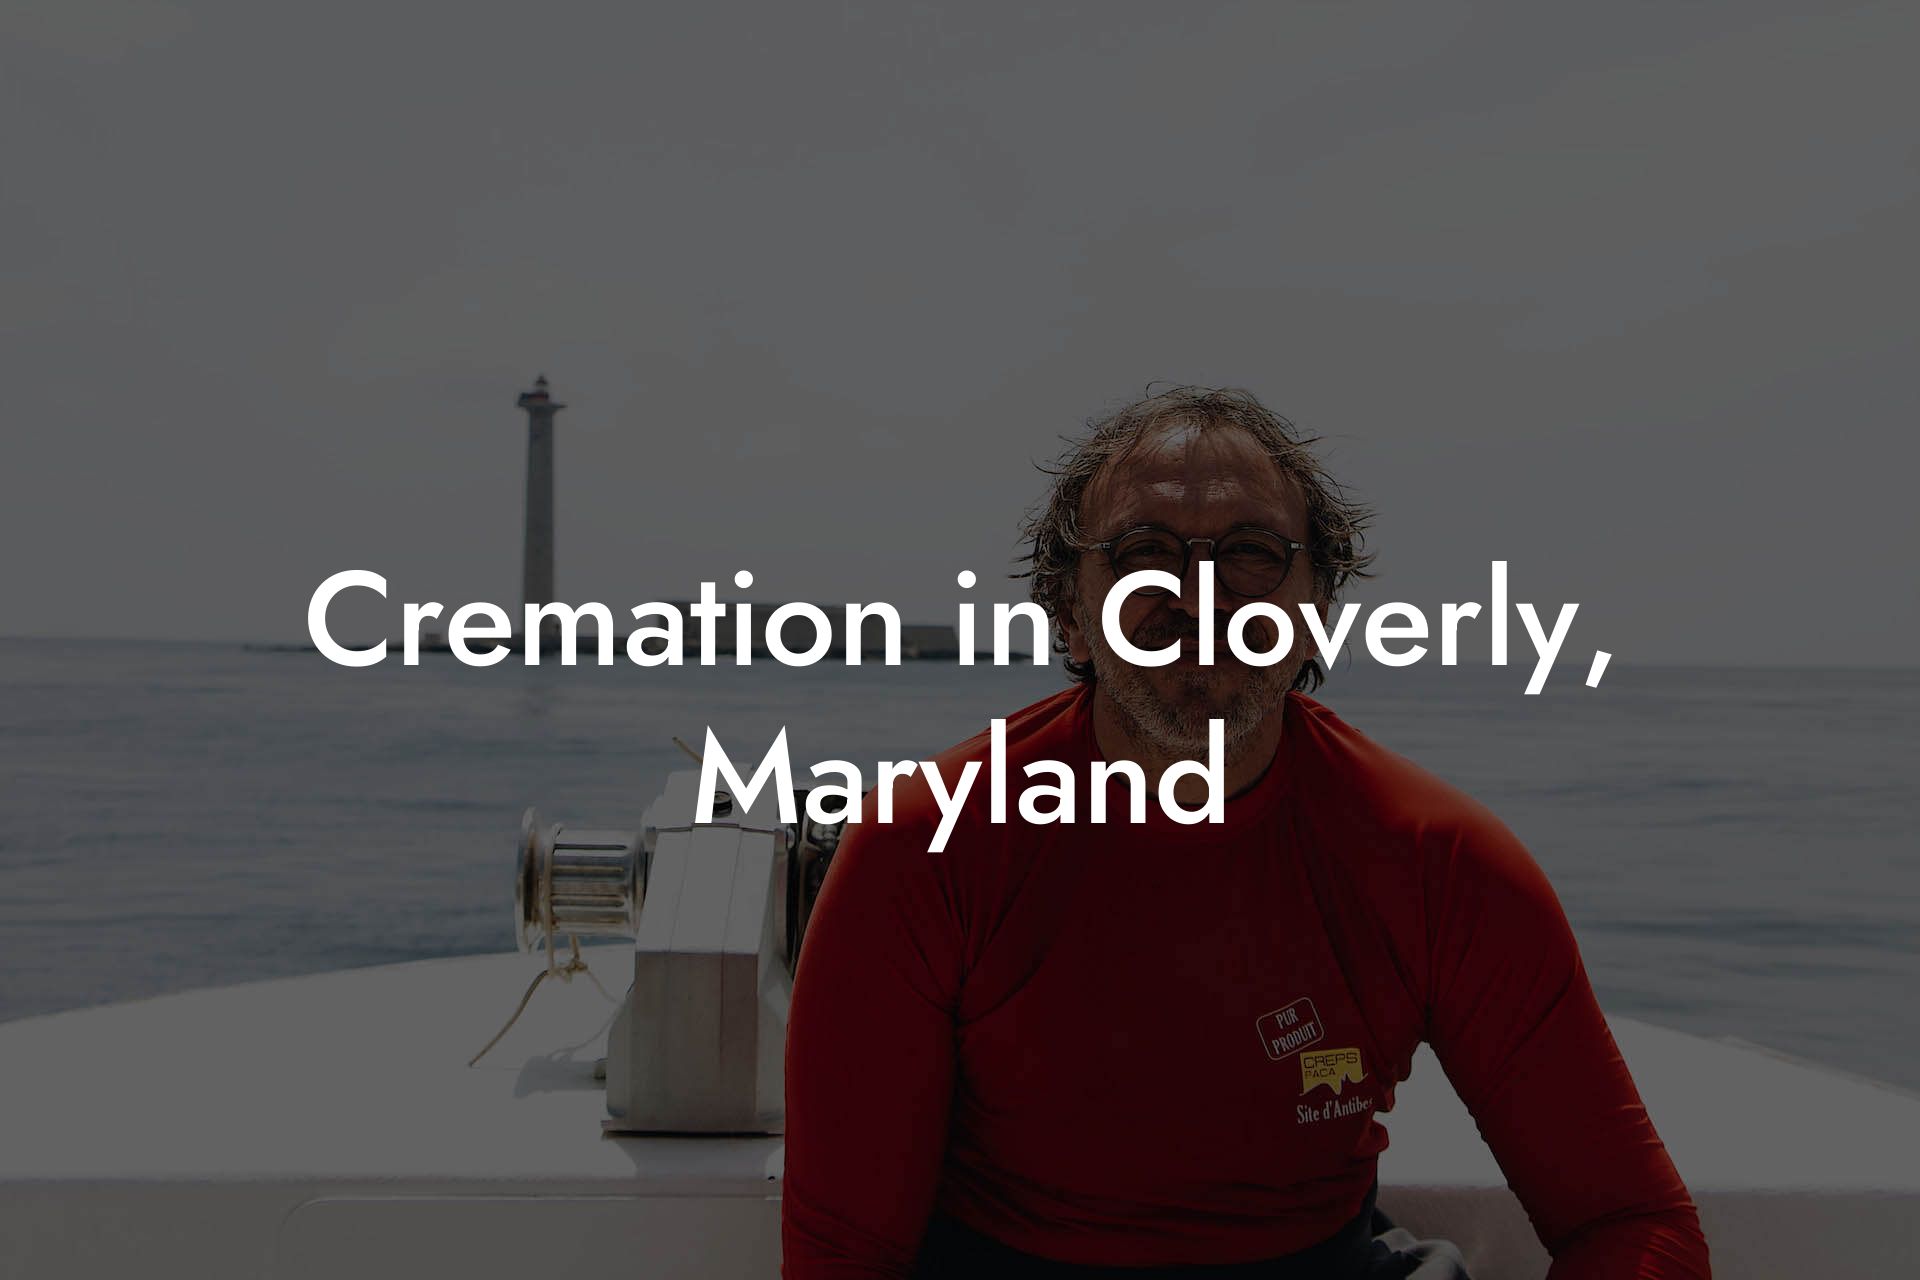 Cremation in Cloverly, Maryland